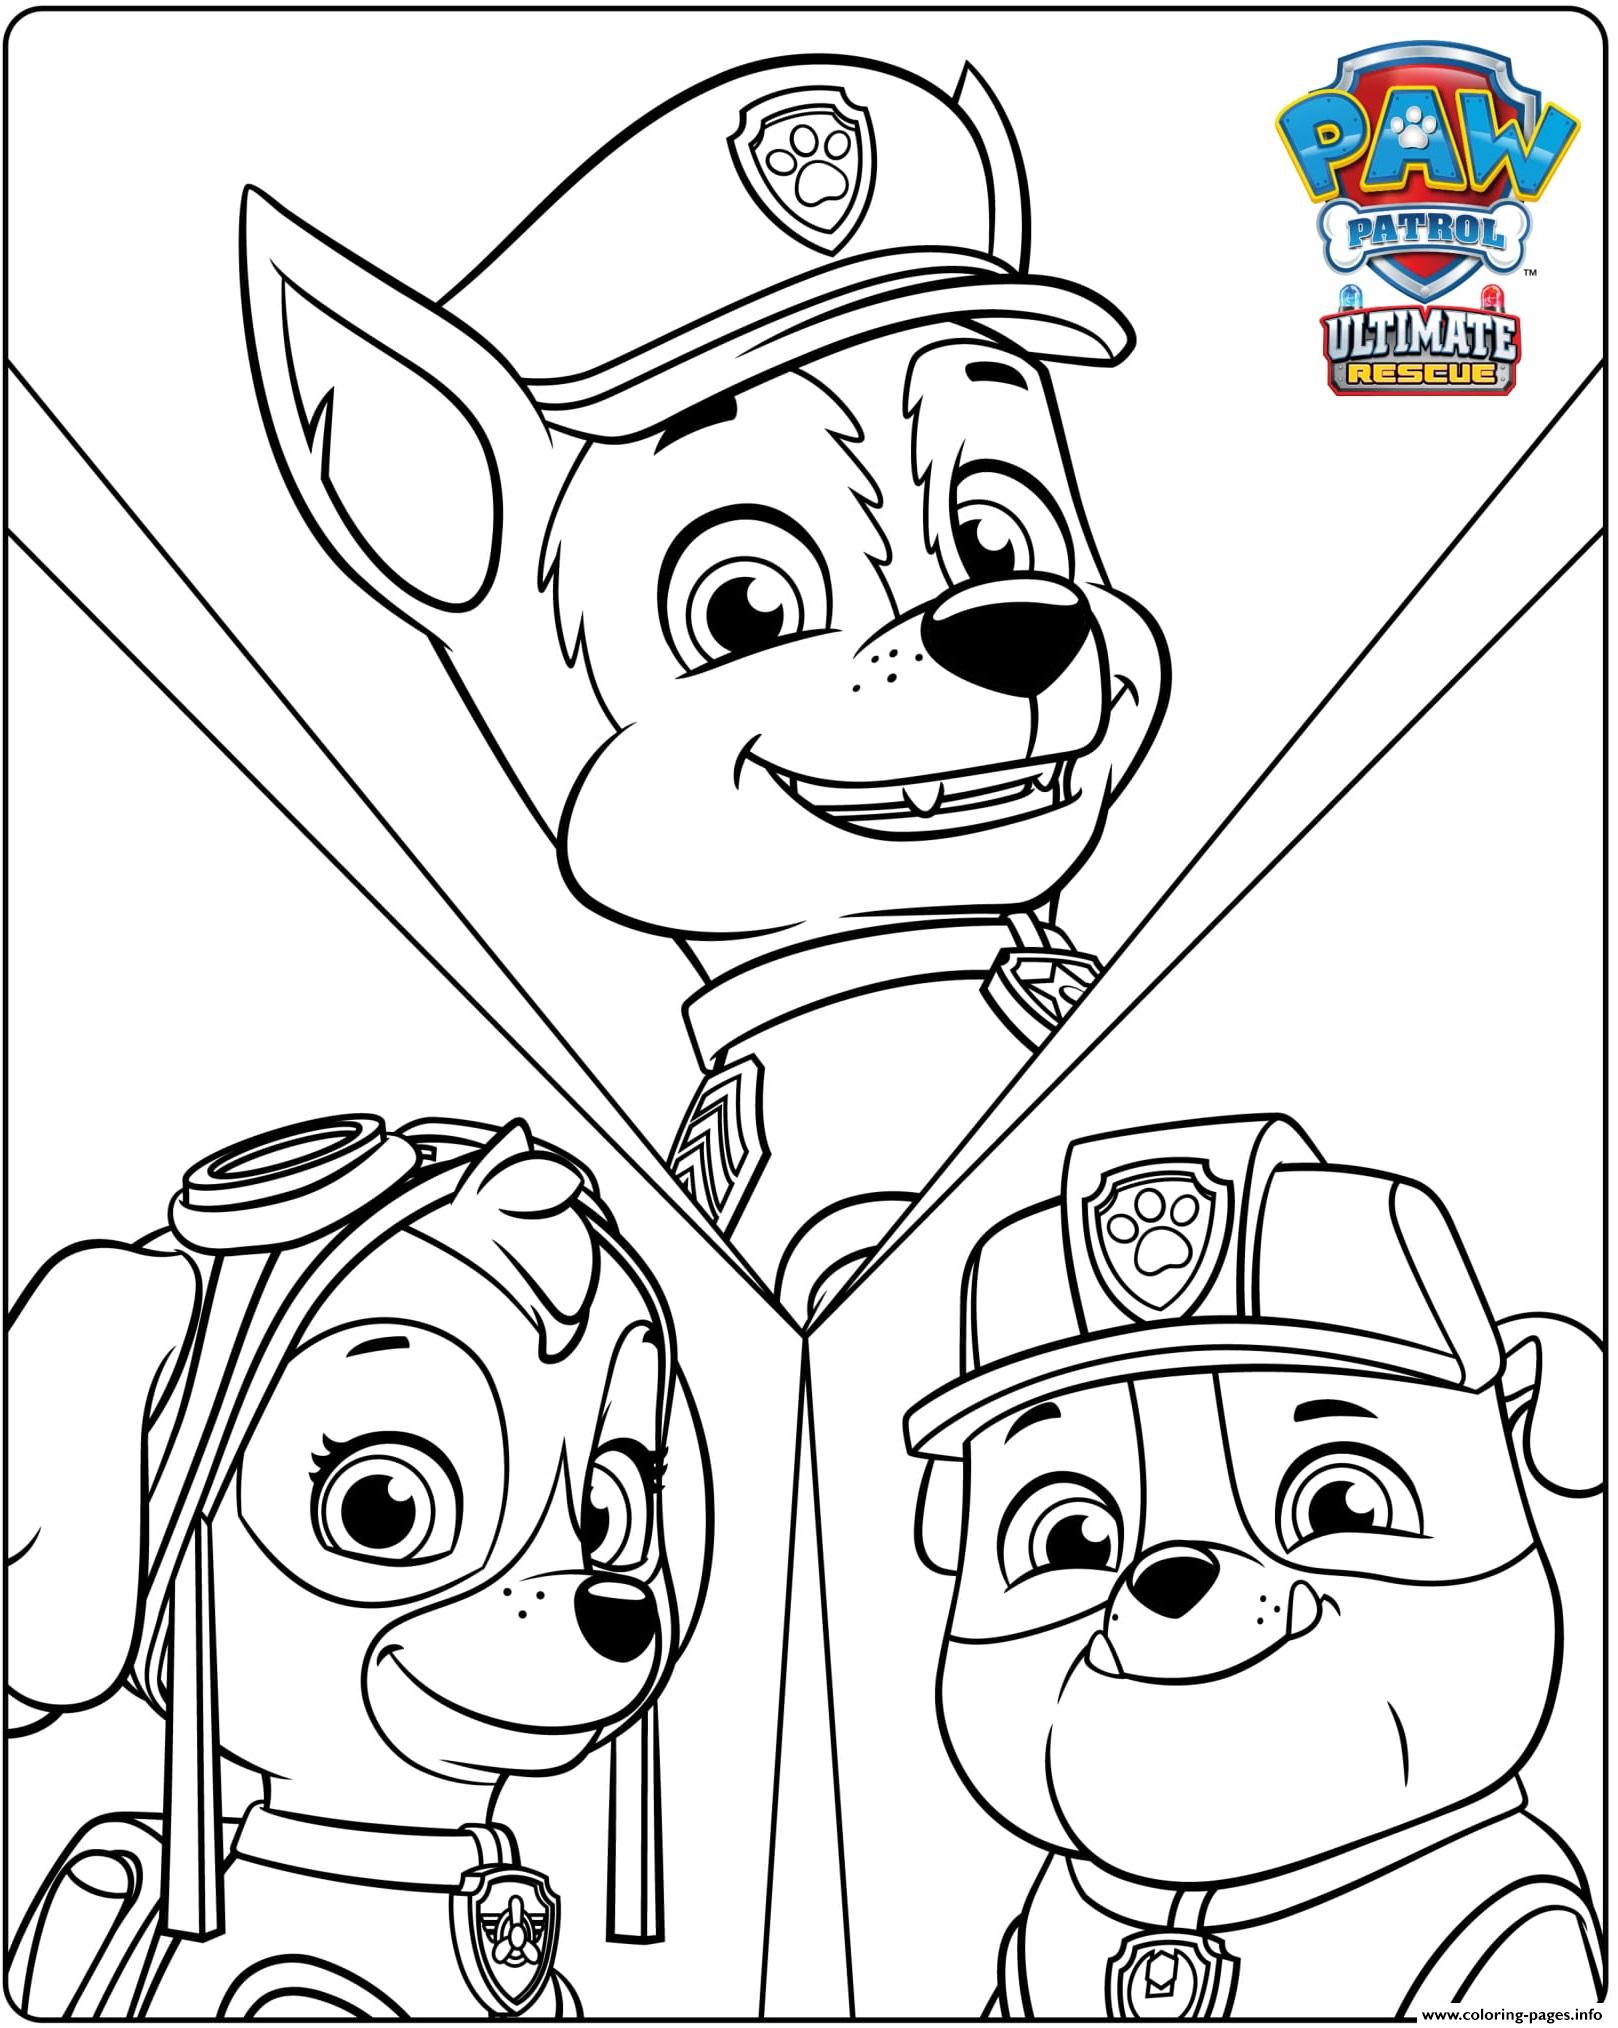 Download Sky Paw Patrol Coloring Pages - Coloring Home